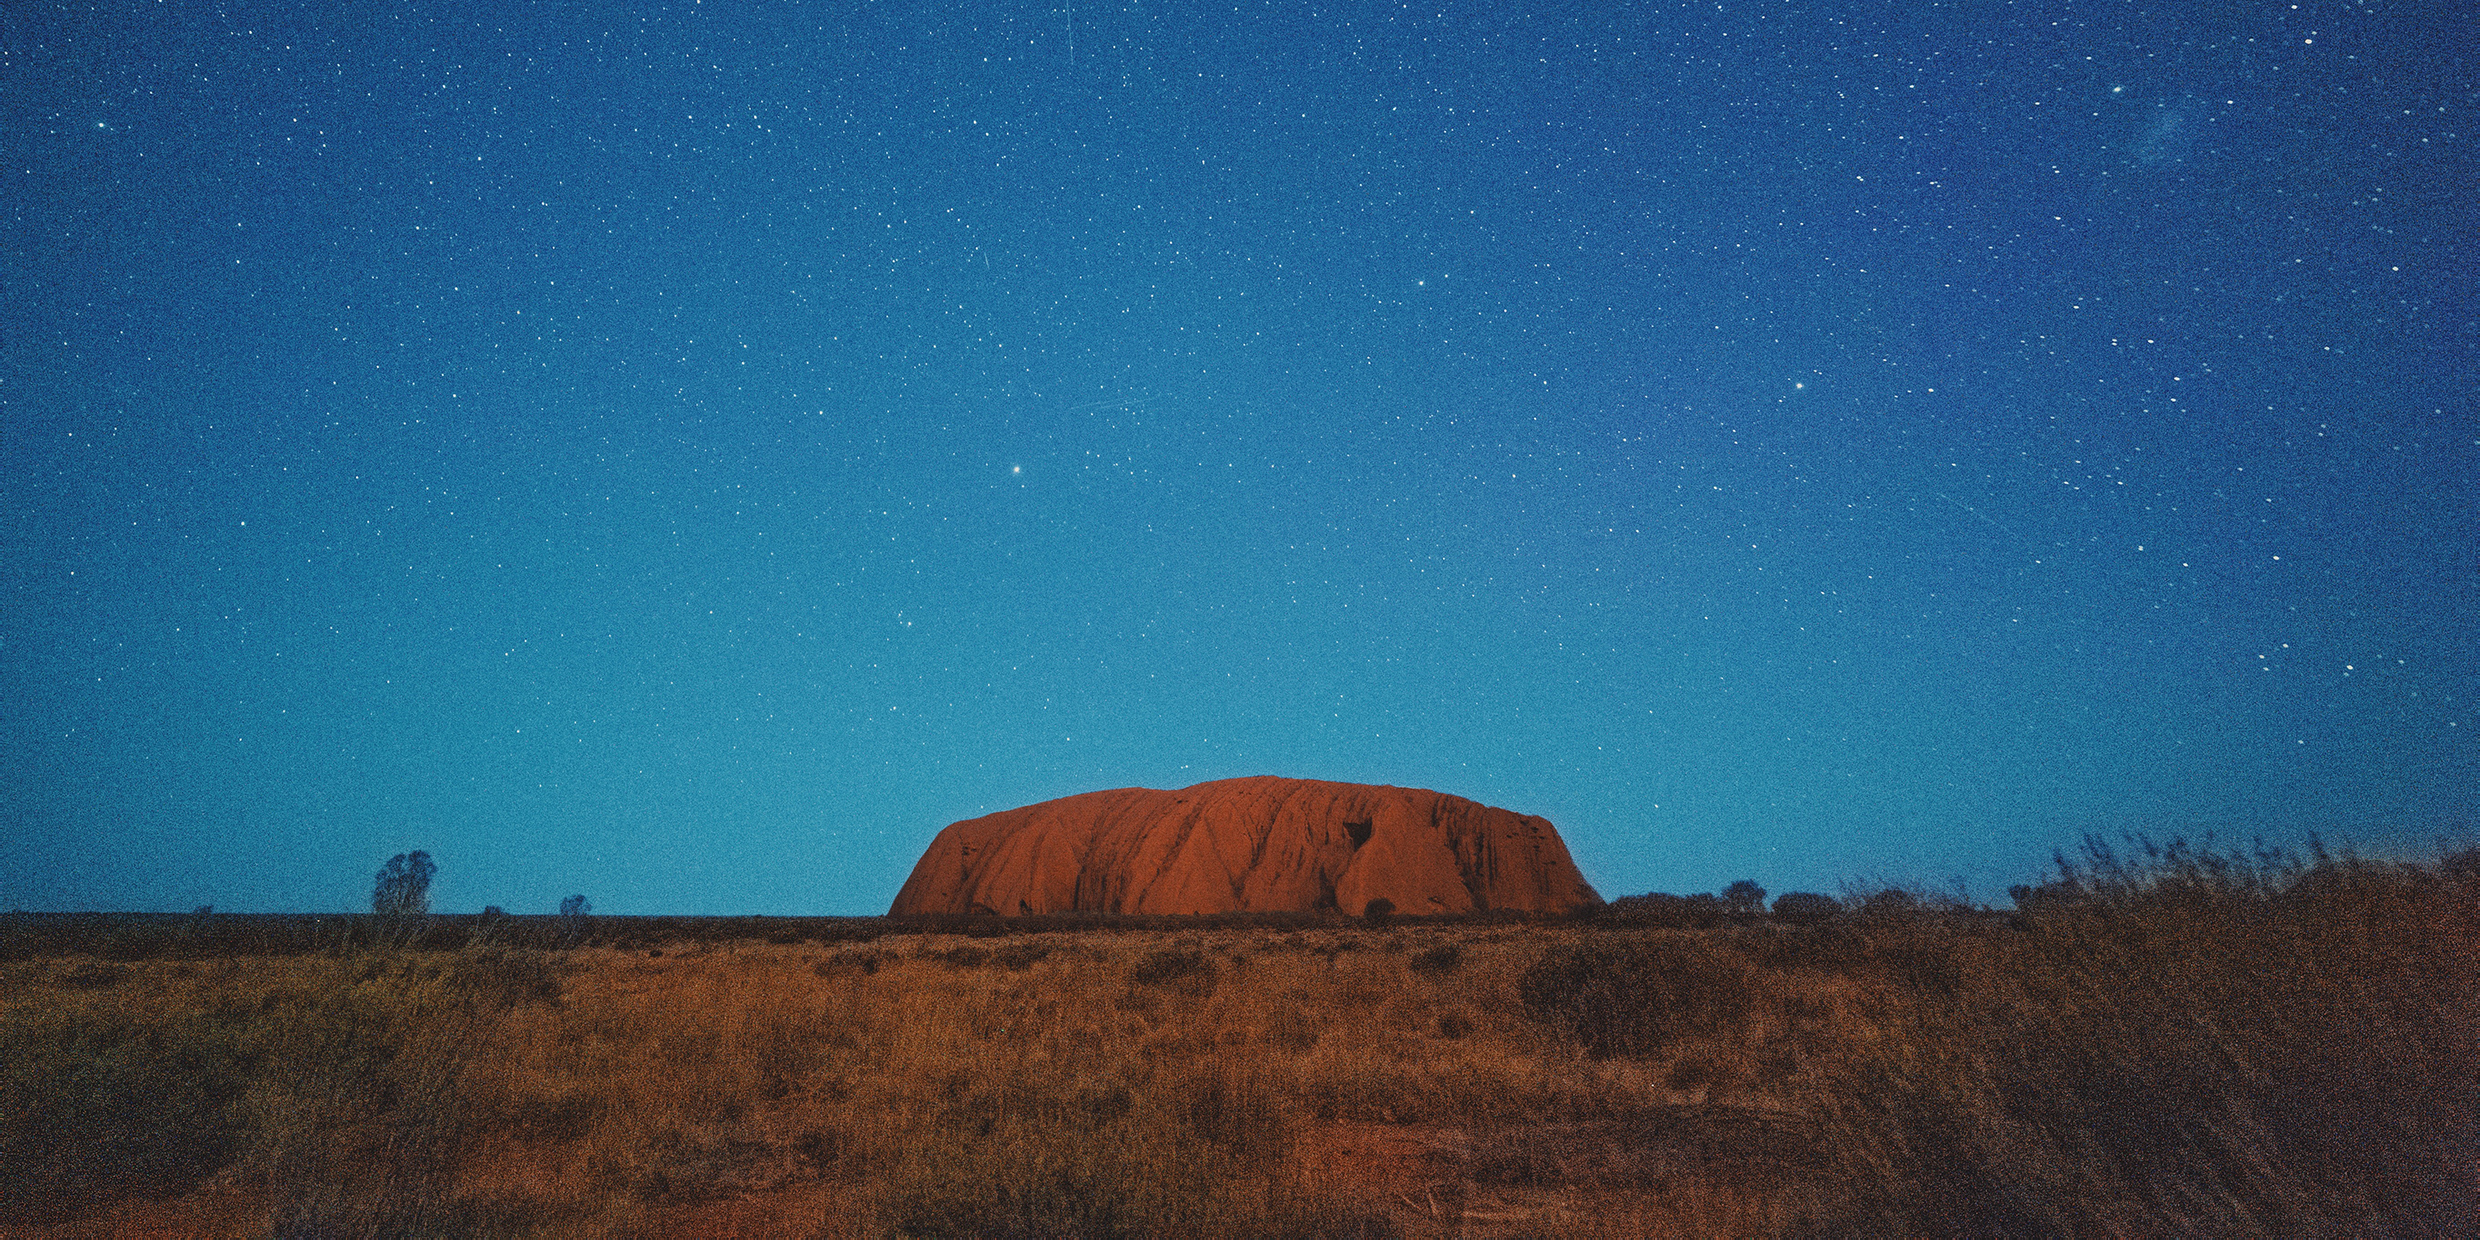 Image of a stone formation rising from the outback under the stars